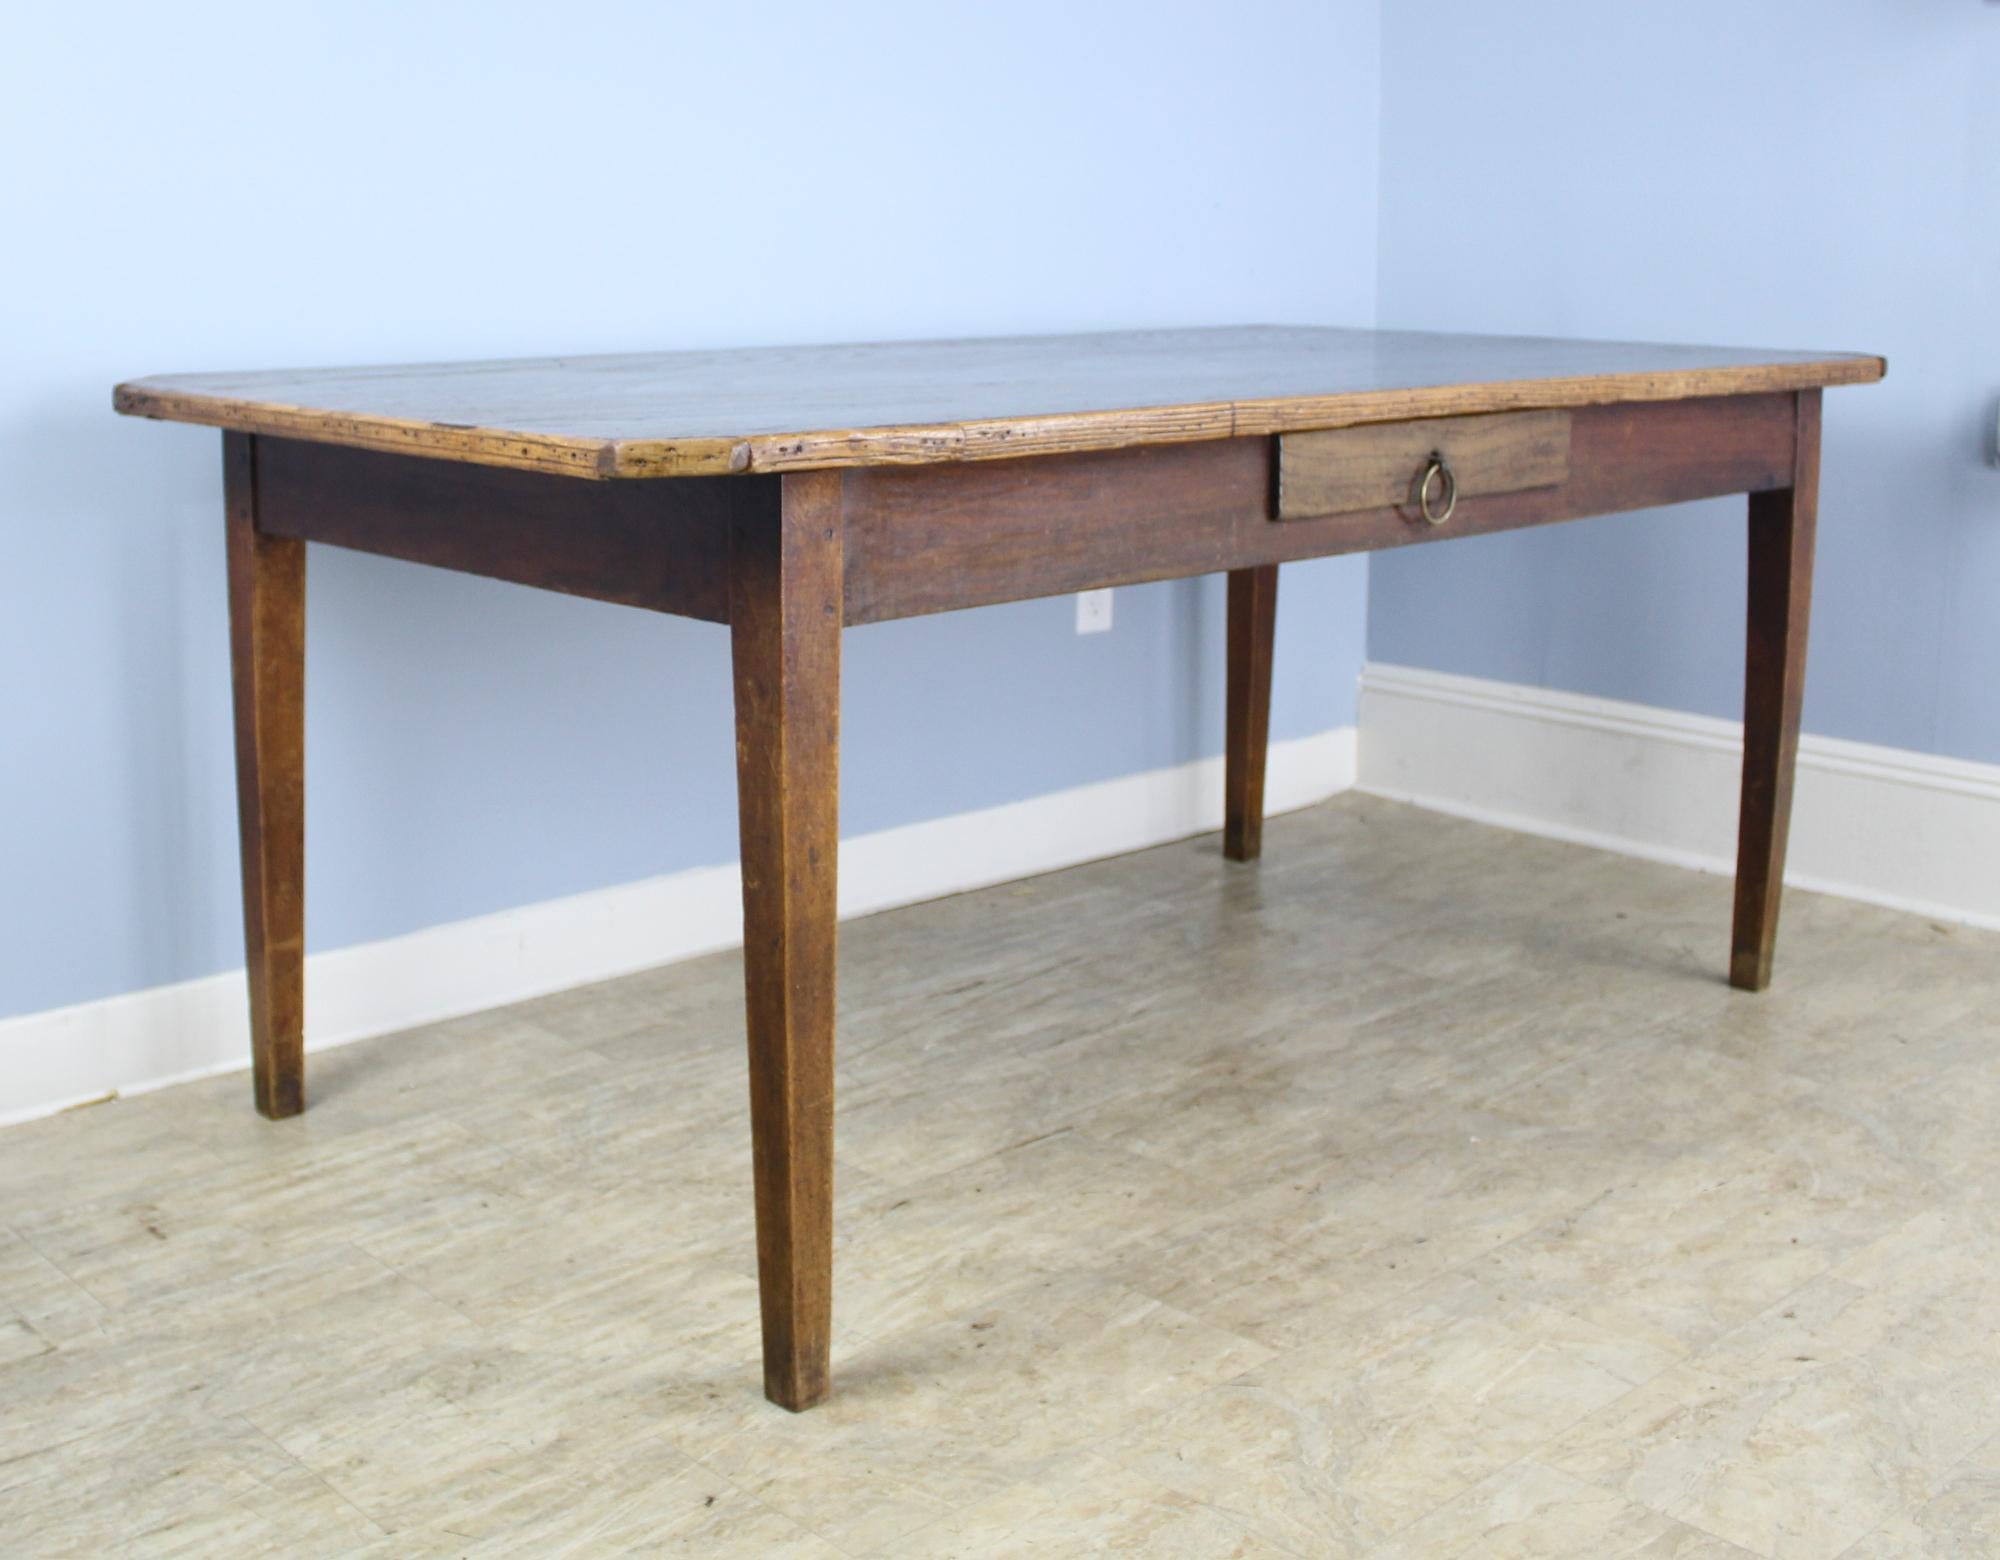 An unusual and exciting chestnut farm table with canted corners and a contrasting decorative edge. We have never had a table like this! The chestnut has glorious glowing patina and rich color. Single drawer with divided space. A great look! A 24